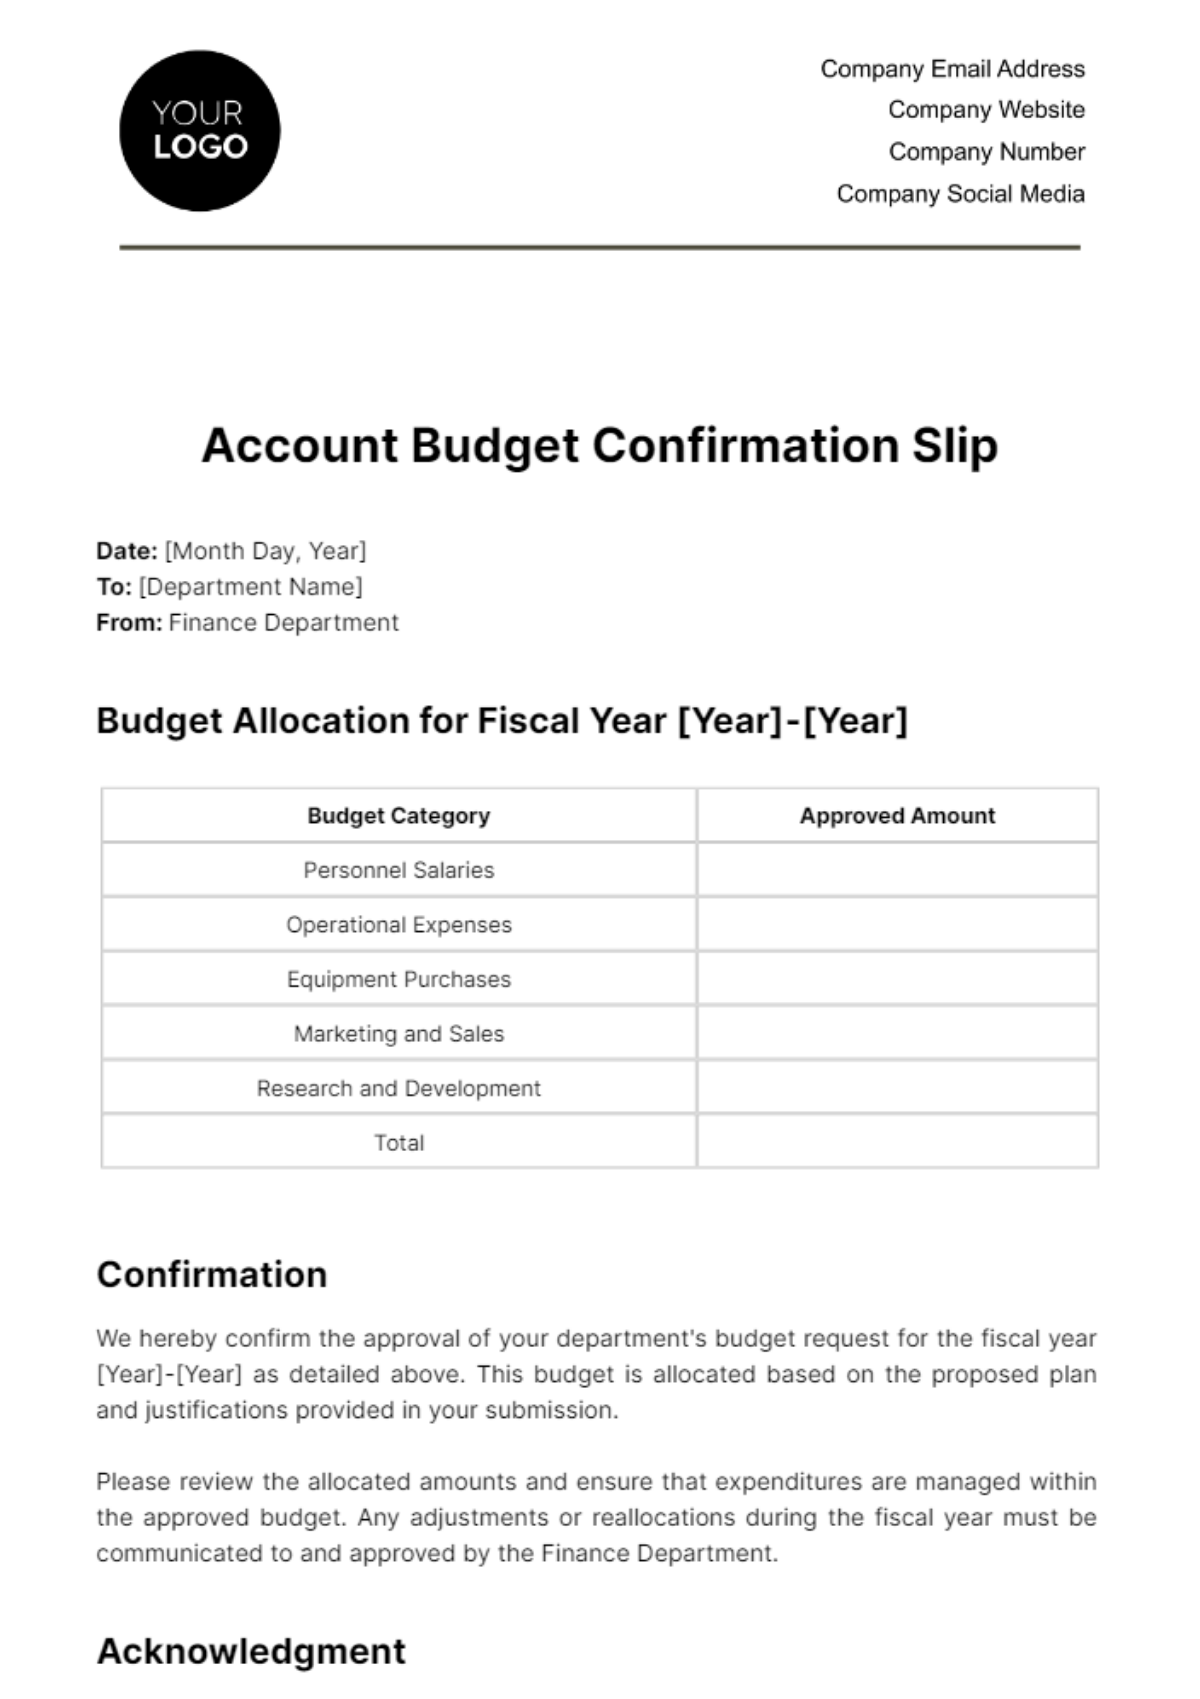 Free Account Budget Confirmation Slip Template